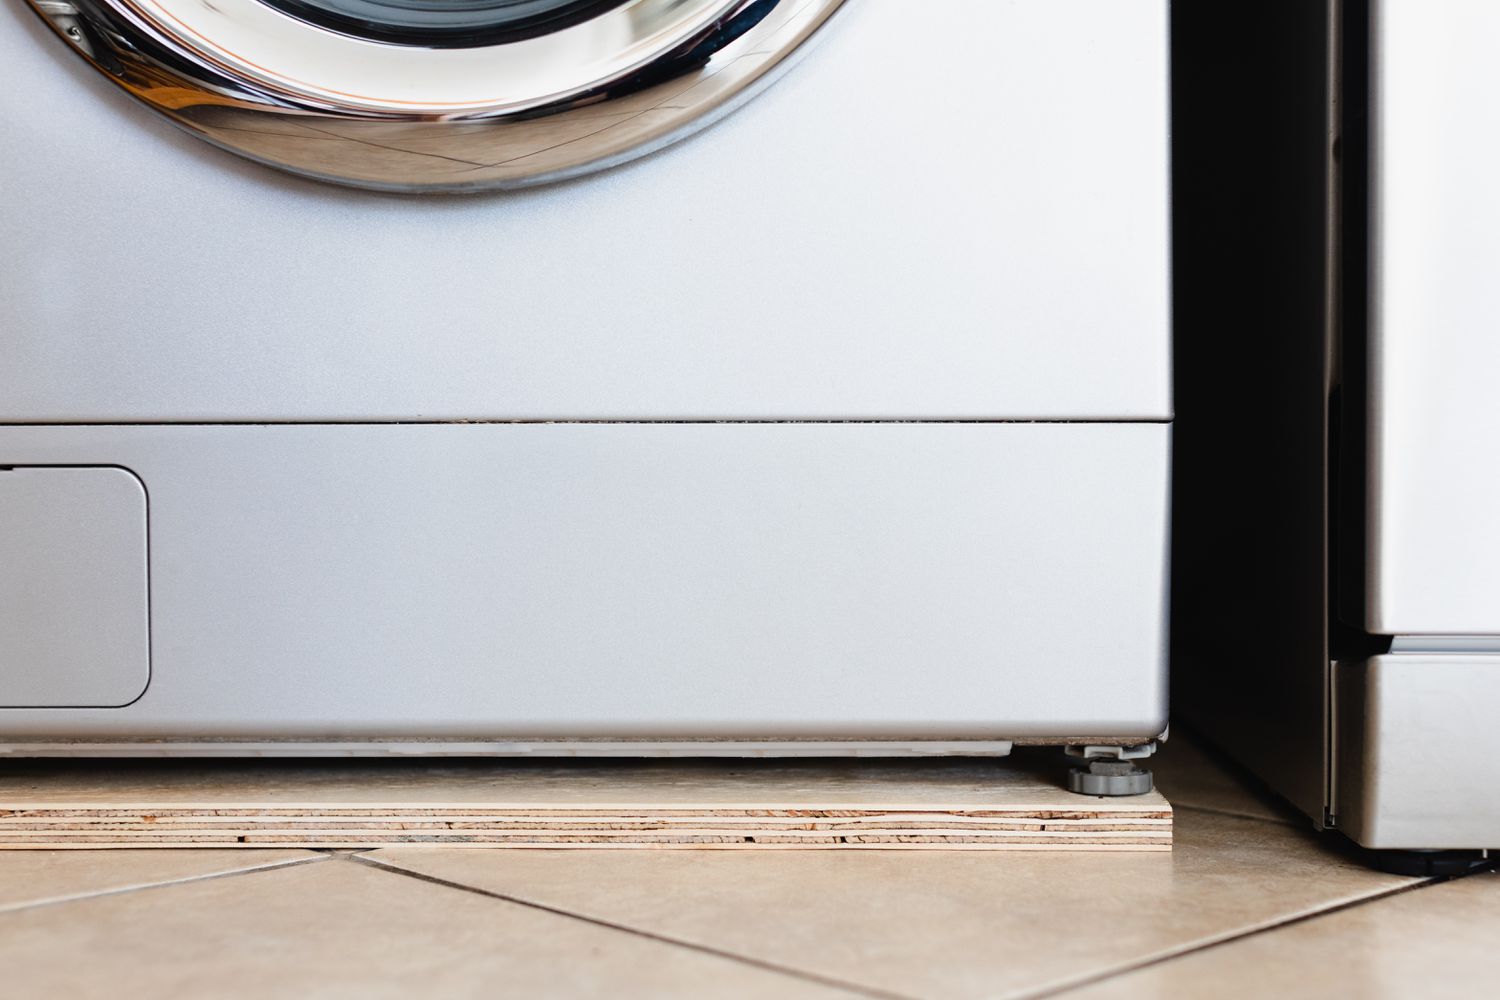 How To Stop Your Washing Machine From Shaking